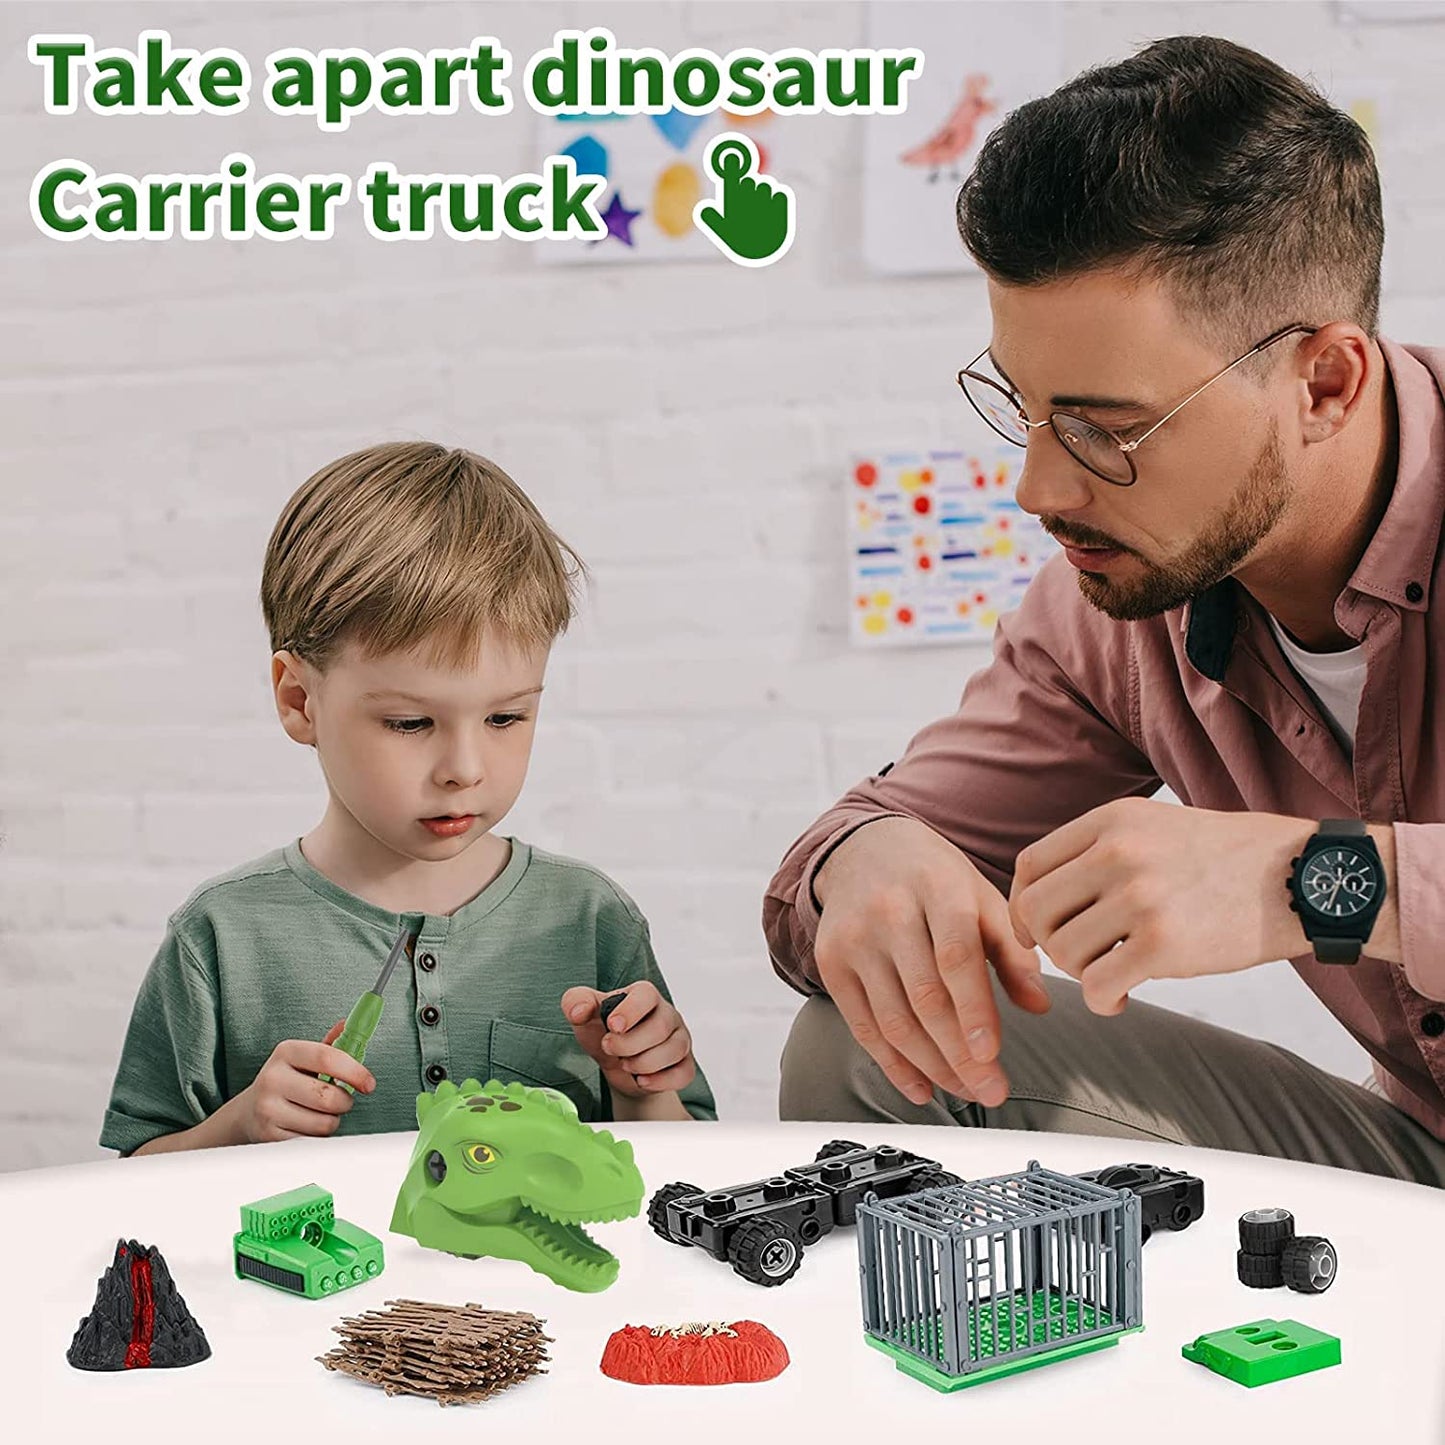 Dinosaur Truck Toy Transport Carrier for Kids with Play Mat, Lights, Sounds Realistic Dinosaurs, Take Apart Monster Dino Car Truck STEM Toys Christmas Birthday Gift for Boys Grils